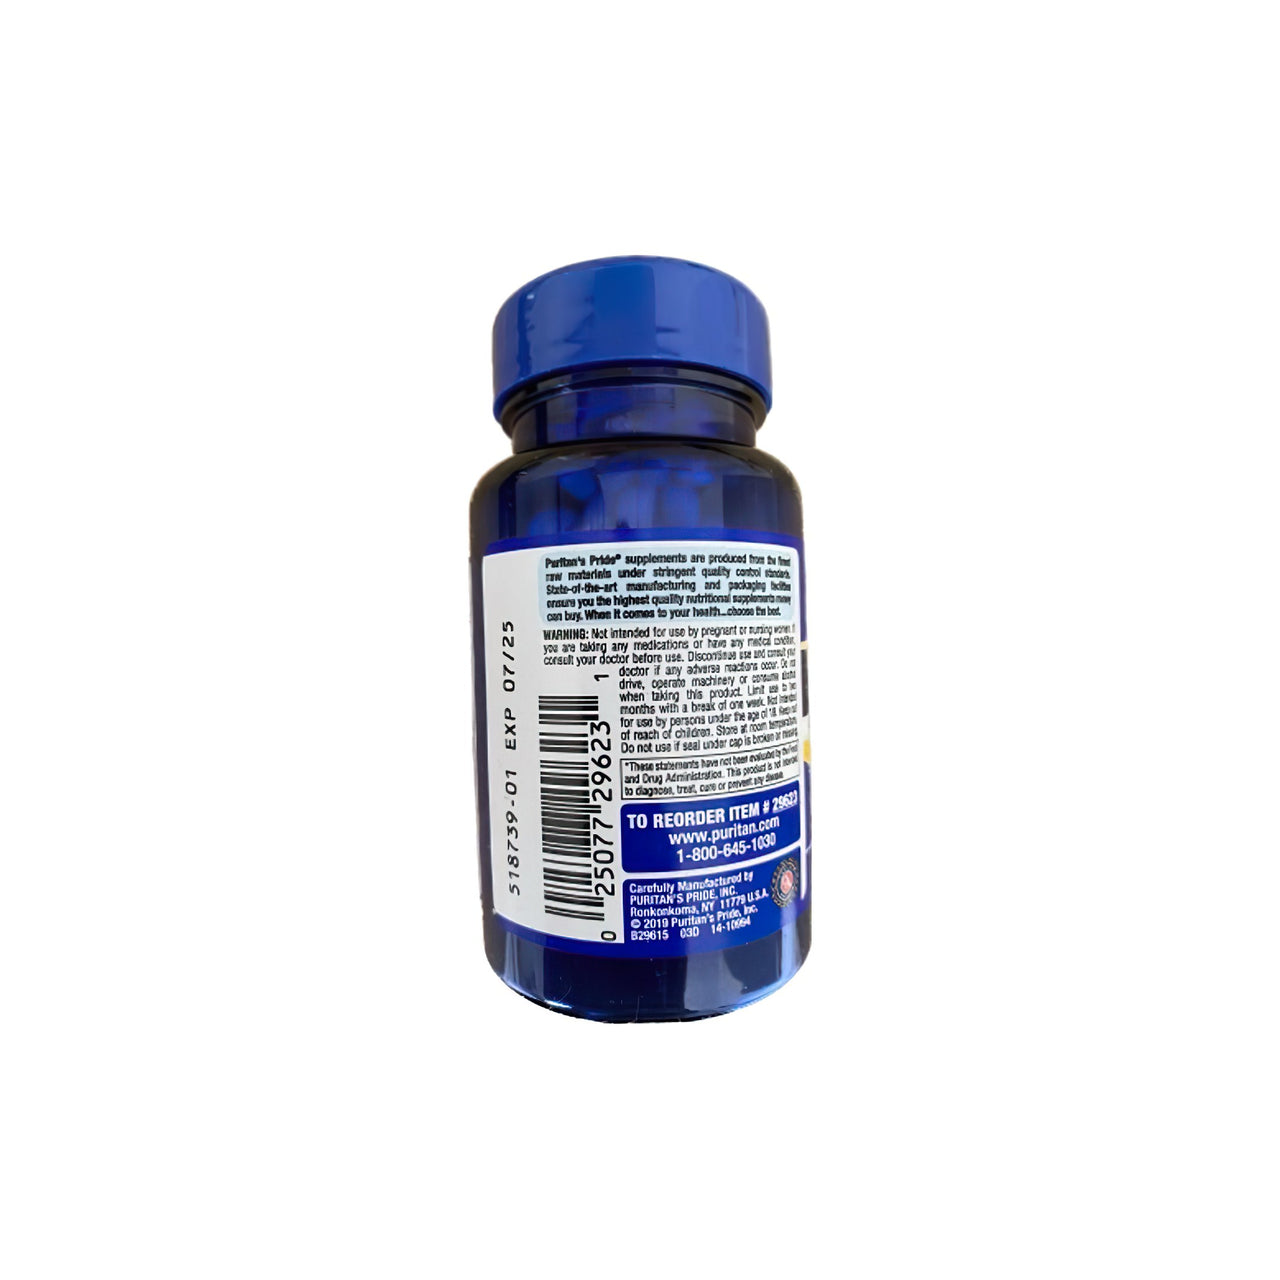 A bottle of Puritan's Pride Extra Strength Melatonin 5 mg 60 rapid release softgels on a white background.